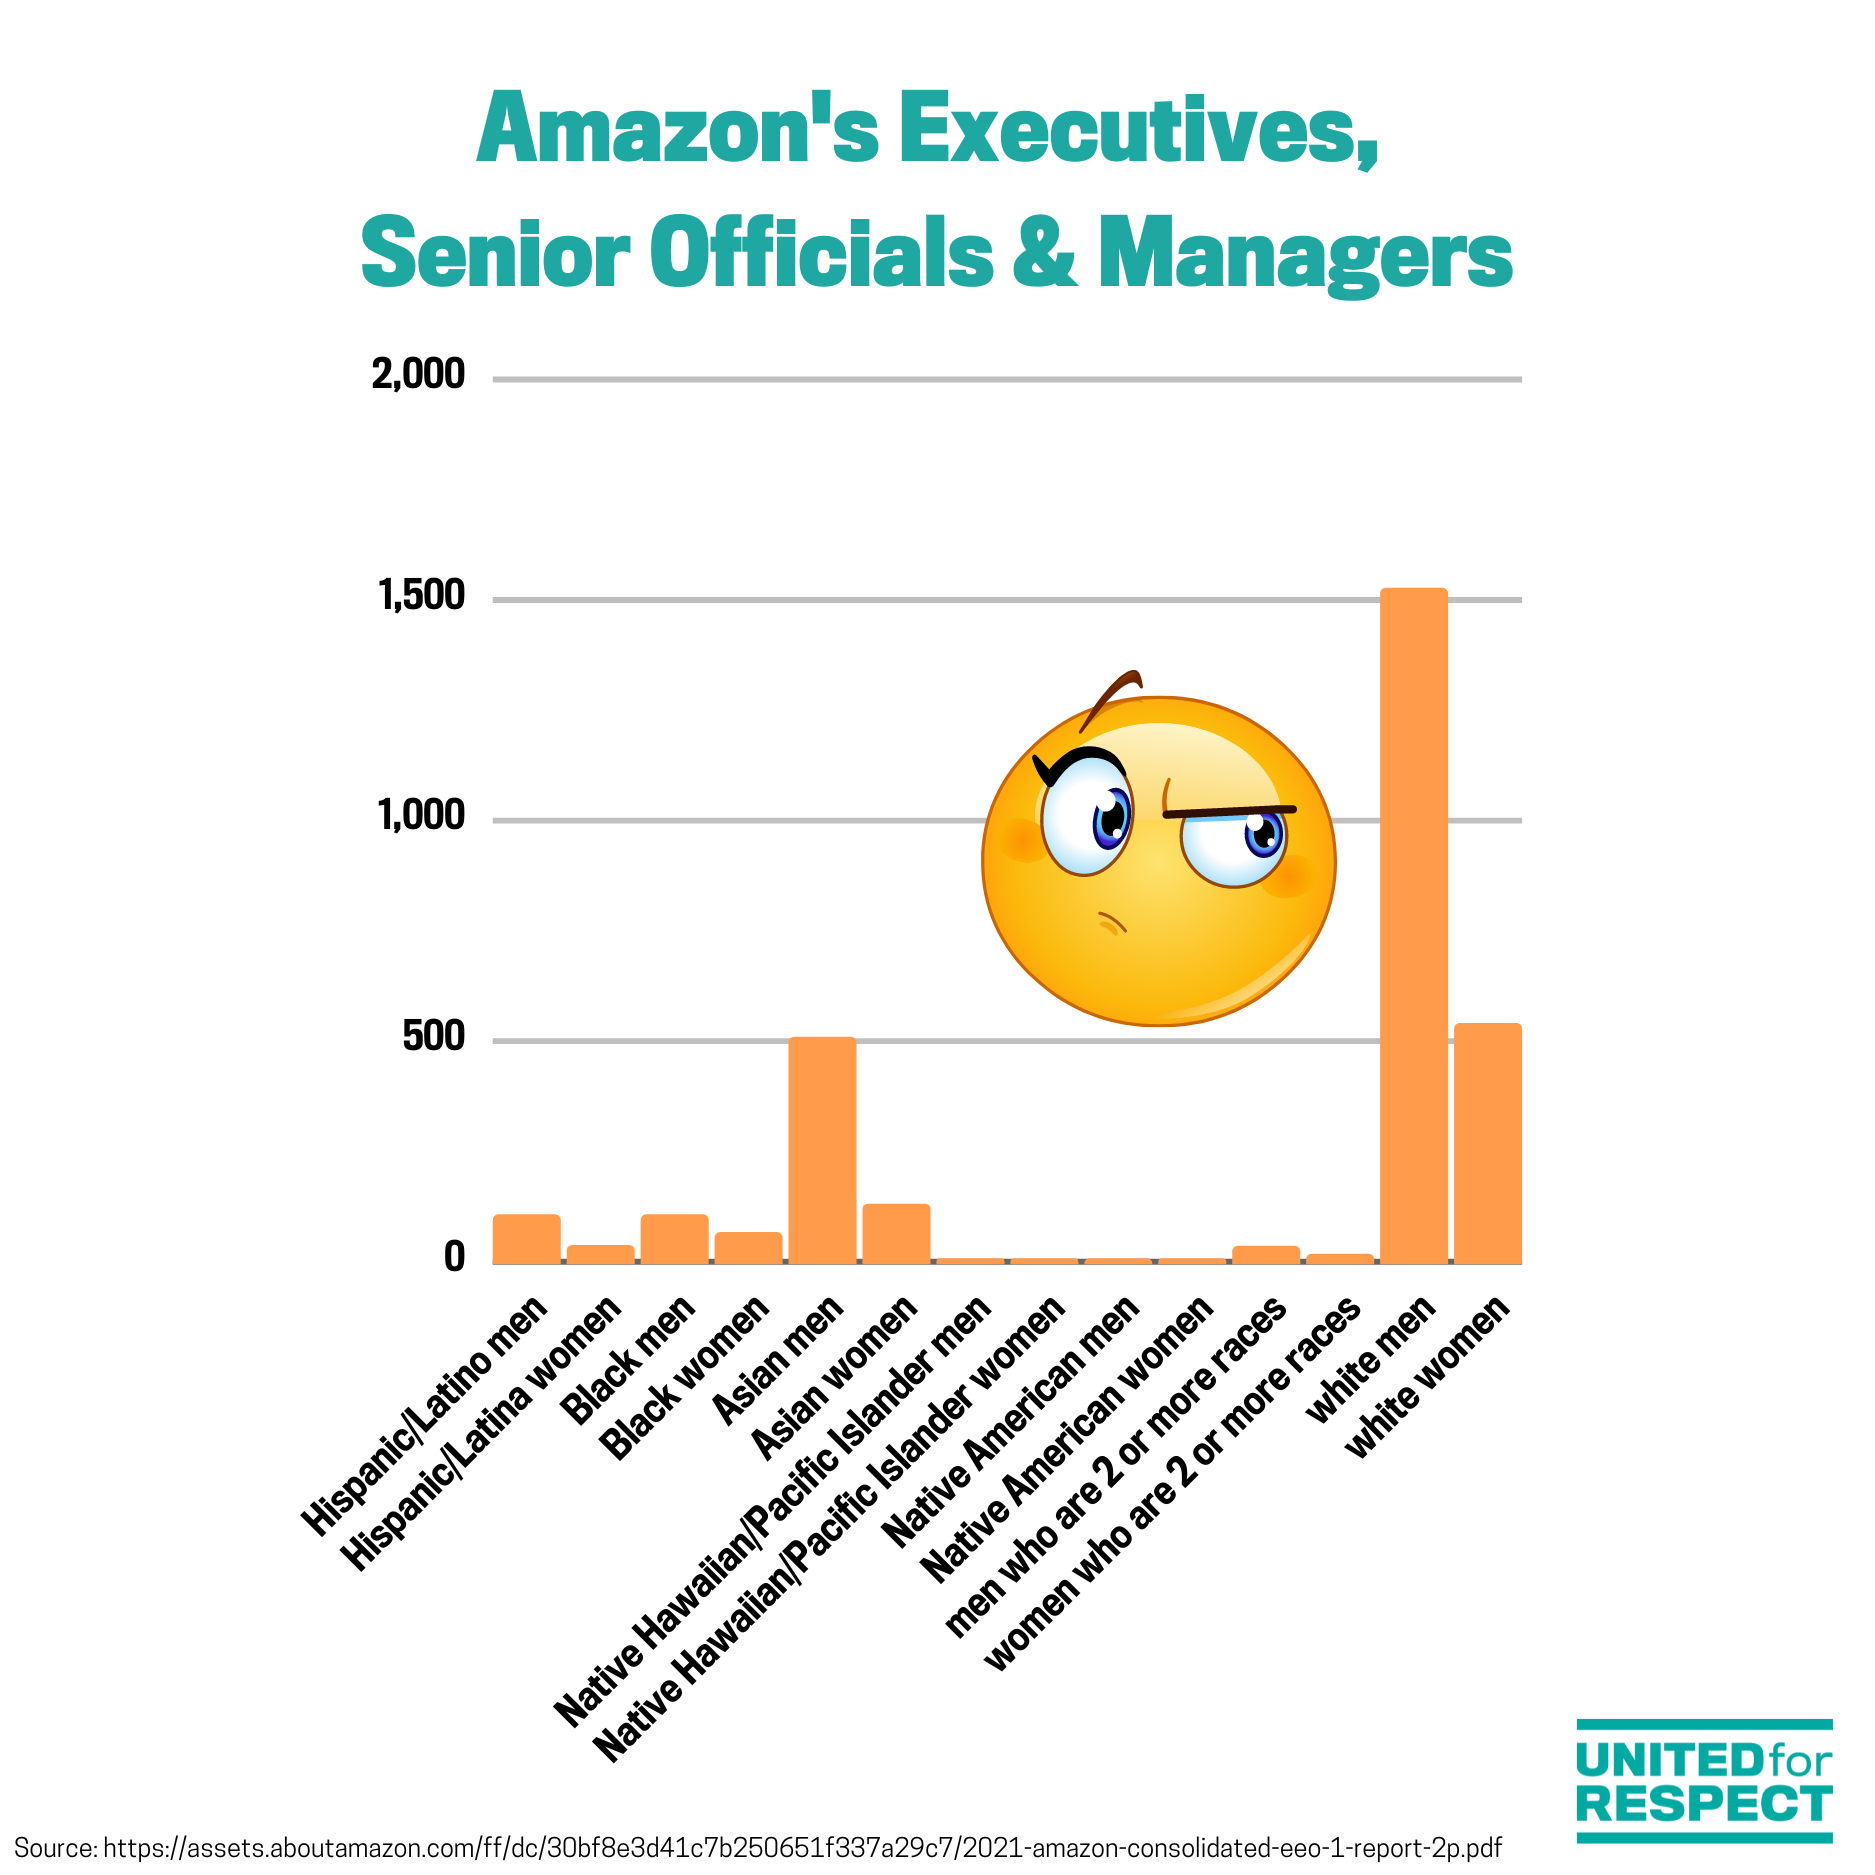 A bar chart visualizes the racial and gender breakdown of Amazon Executives/Senior Officials & Managers. The largest group is white men at over 1500. White women come in second, with over 500. Only 66 are Black women. 